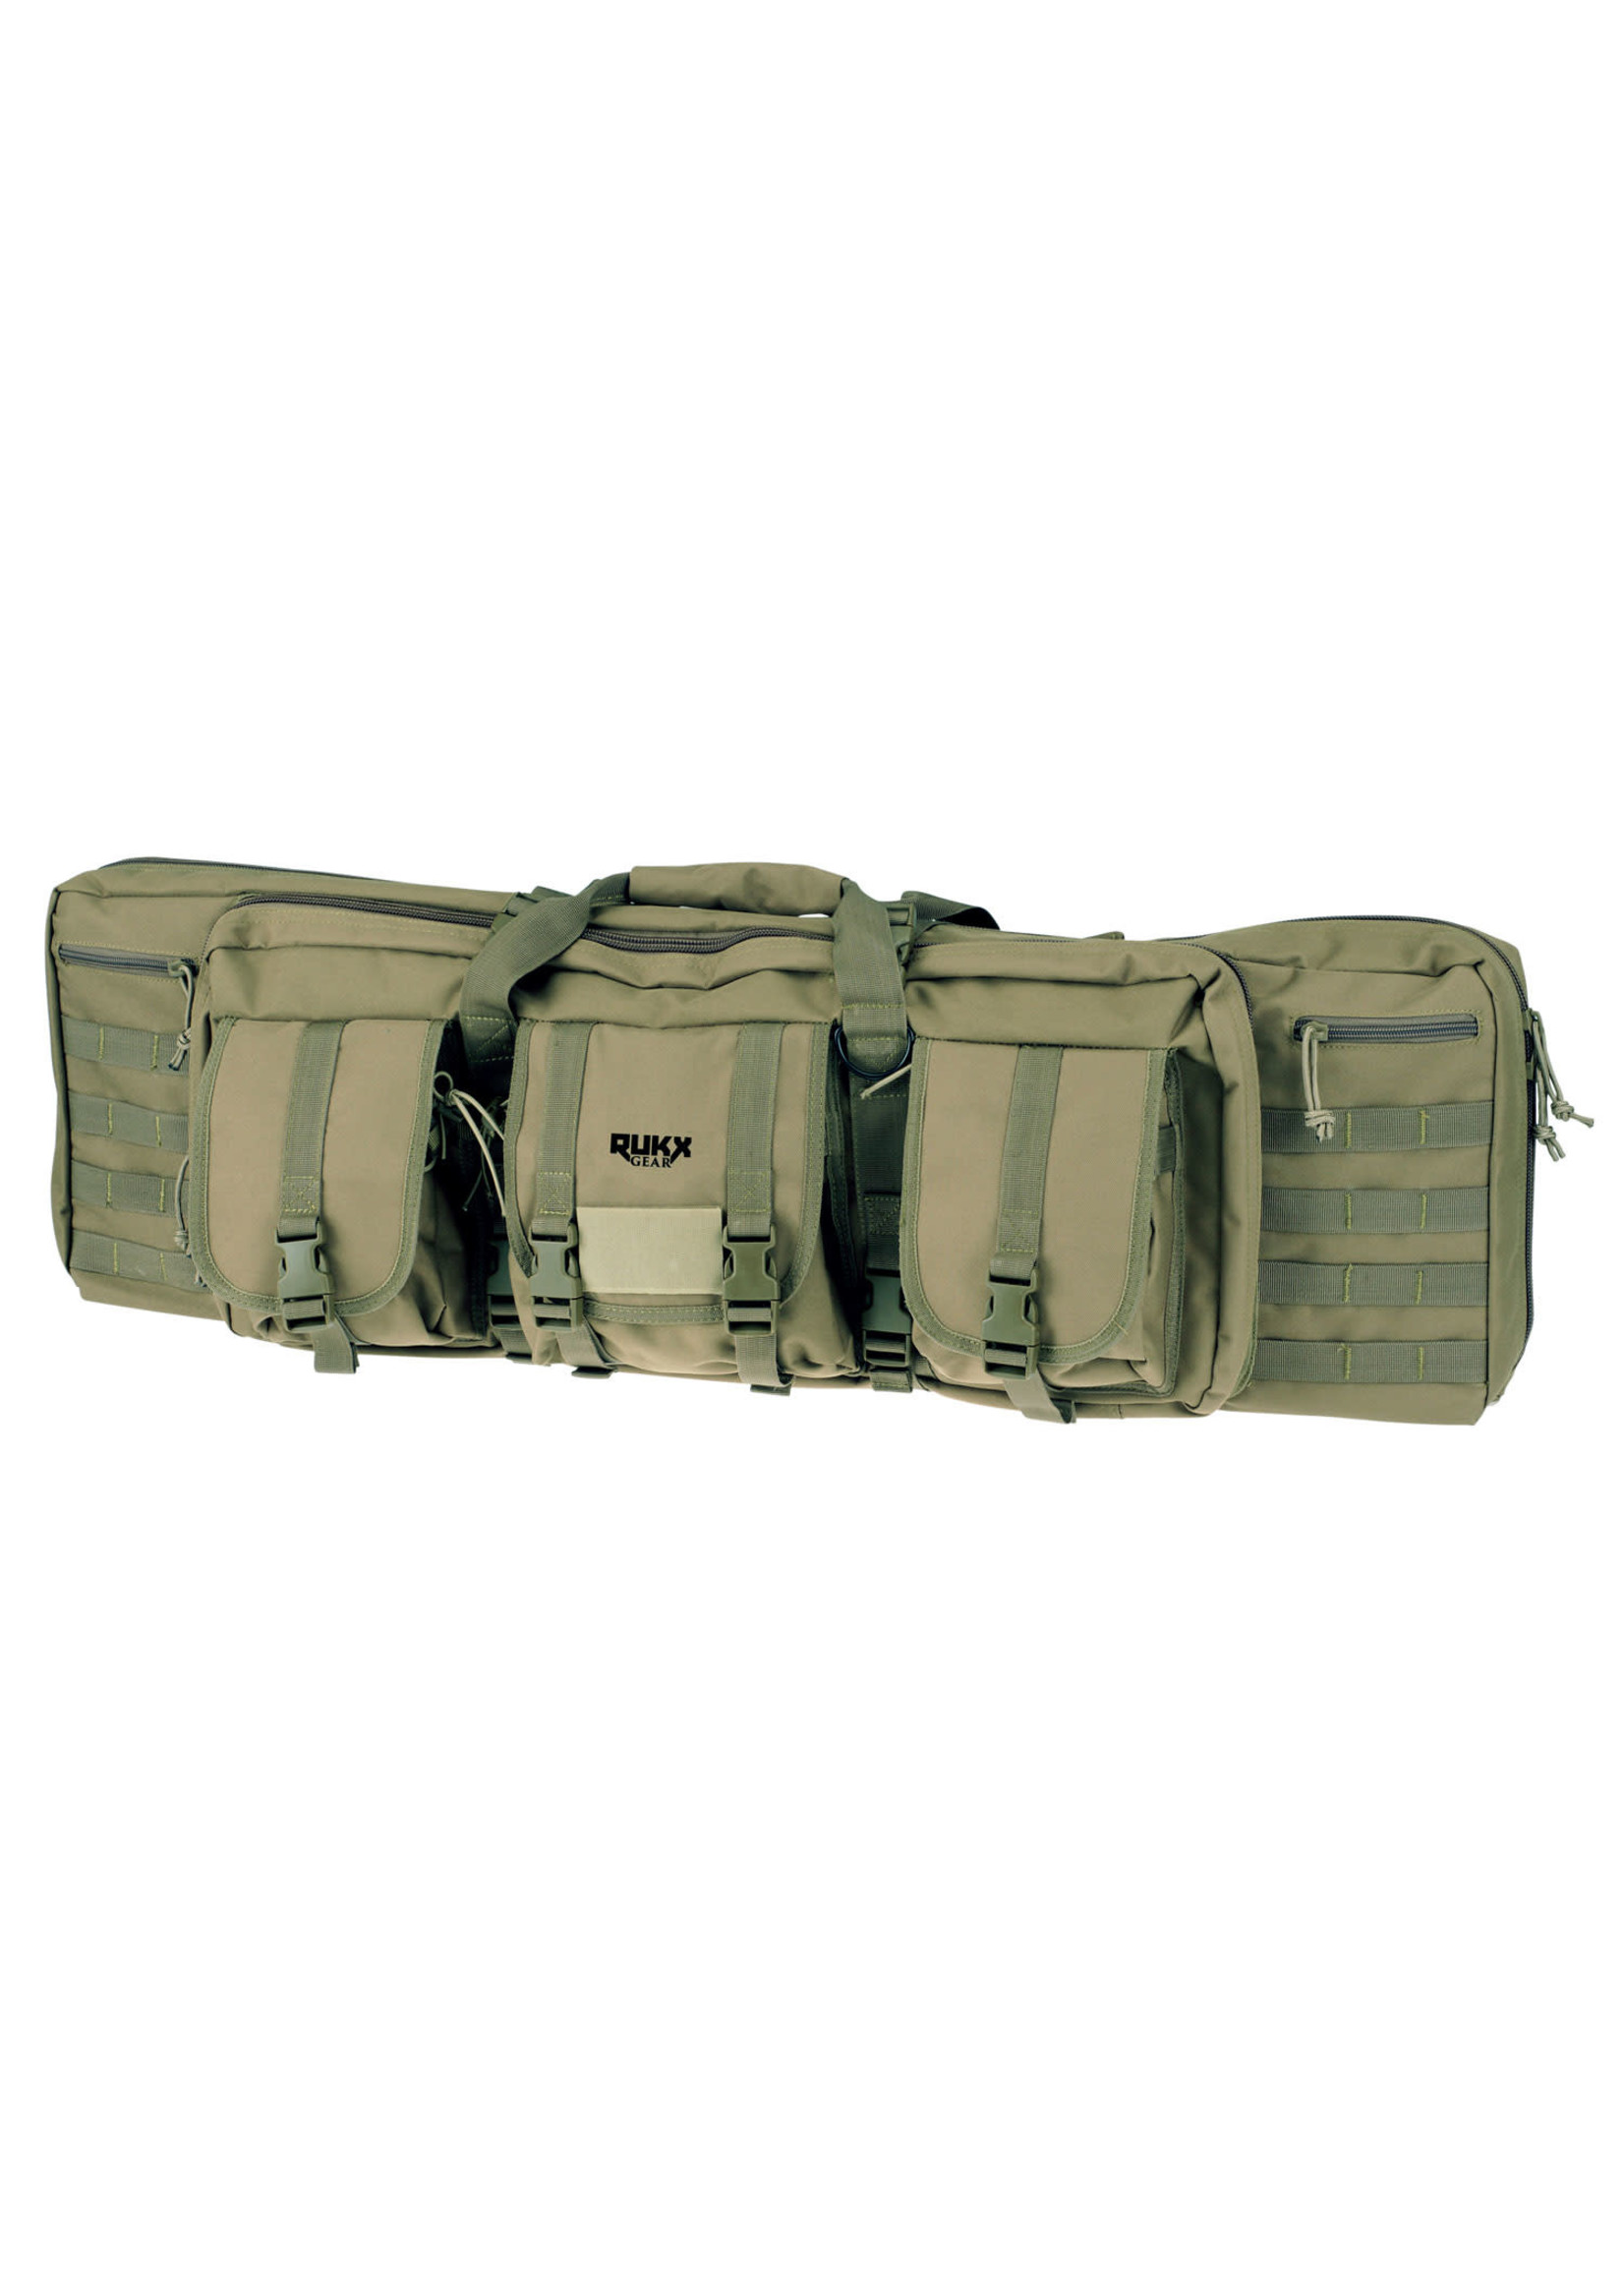 Rukx Gear Rukx Gear ATICT36DGG Tactical Double Gun Case 36" Water Resistant Green 600D Polyester with Non-Rust Zippers, Reinforced Velcro, & Adjustable Back Straps